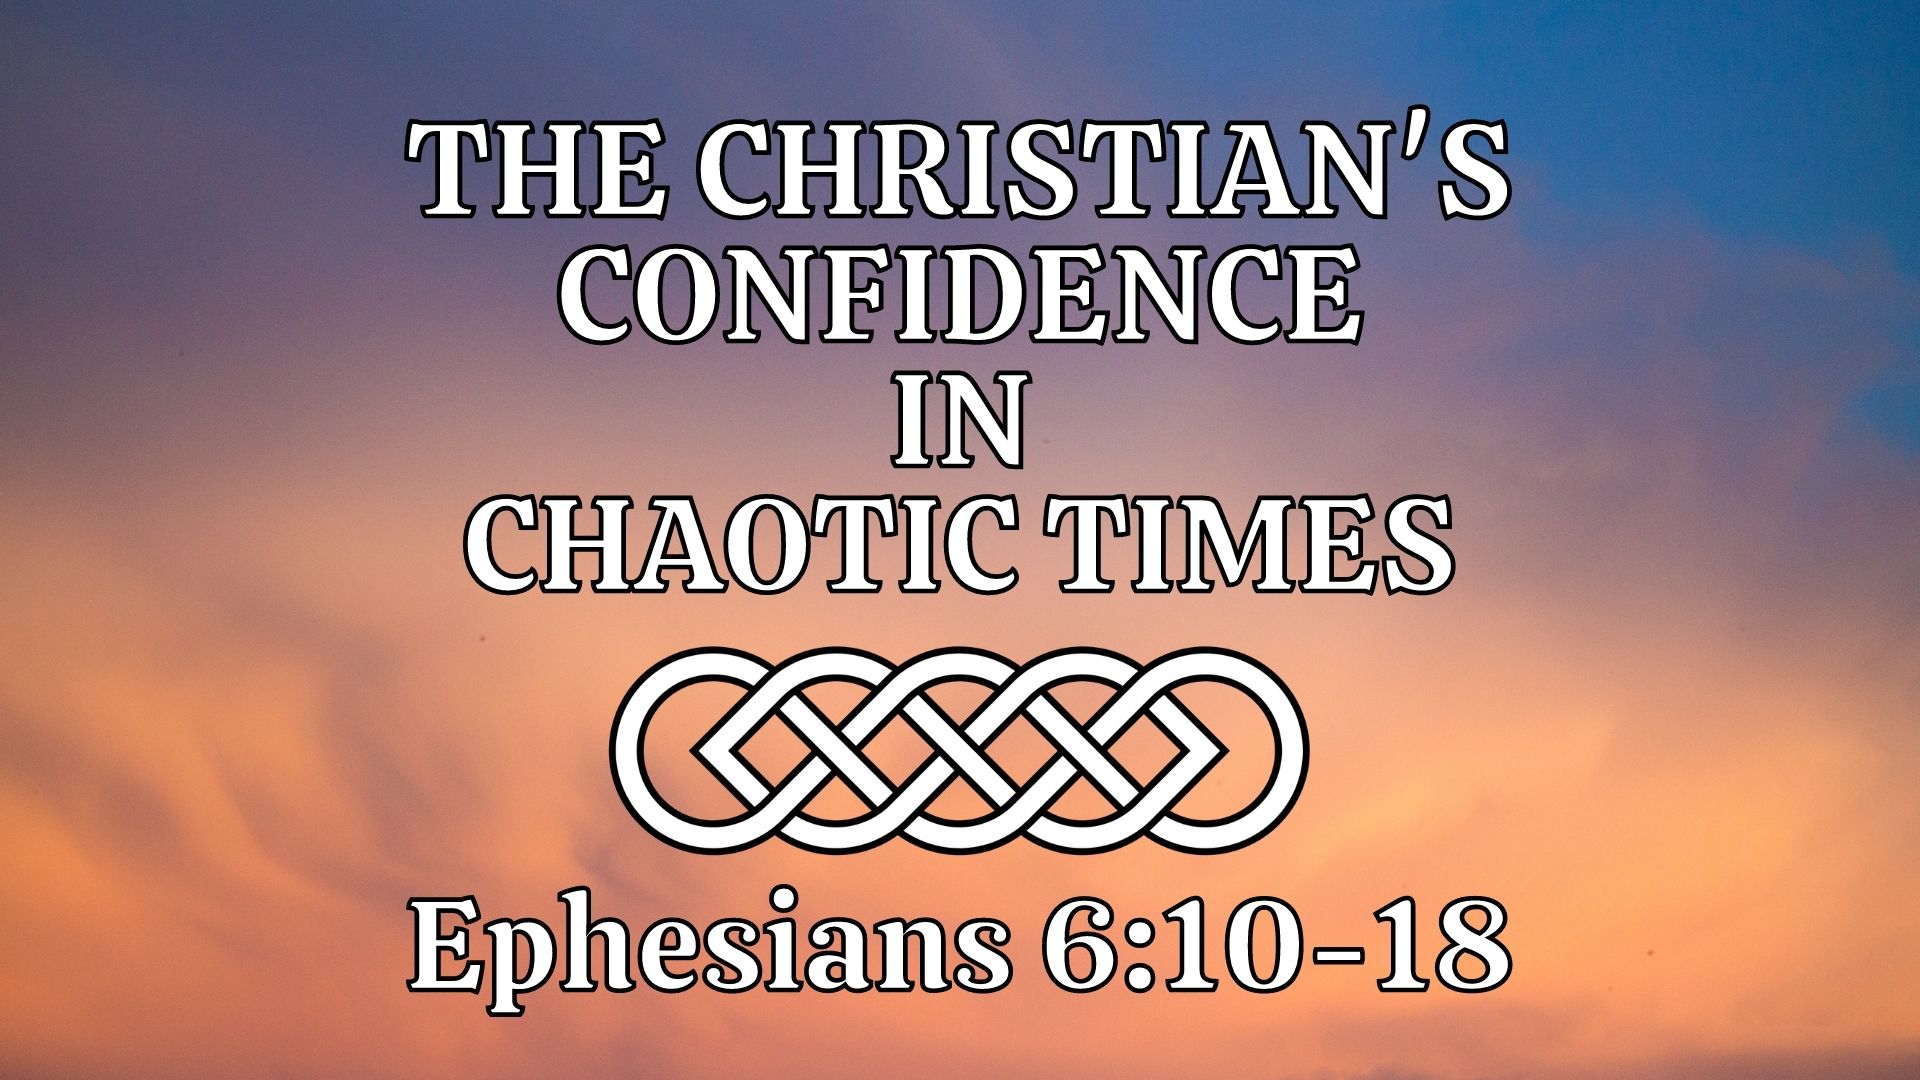 The Christian's Confidence in Chaotic Times (Ephesians 6:10-18) Image